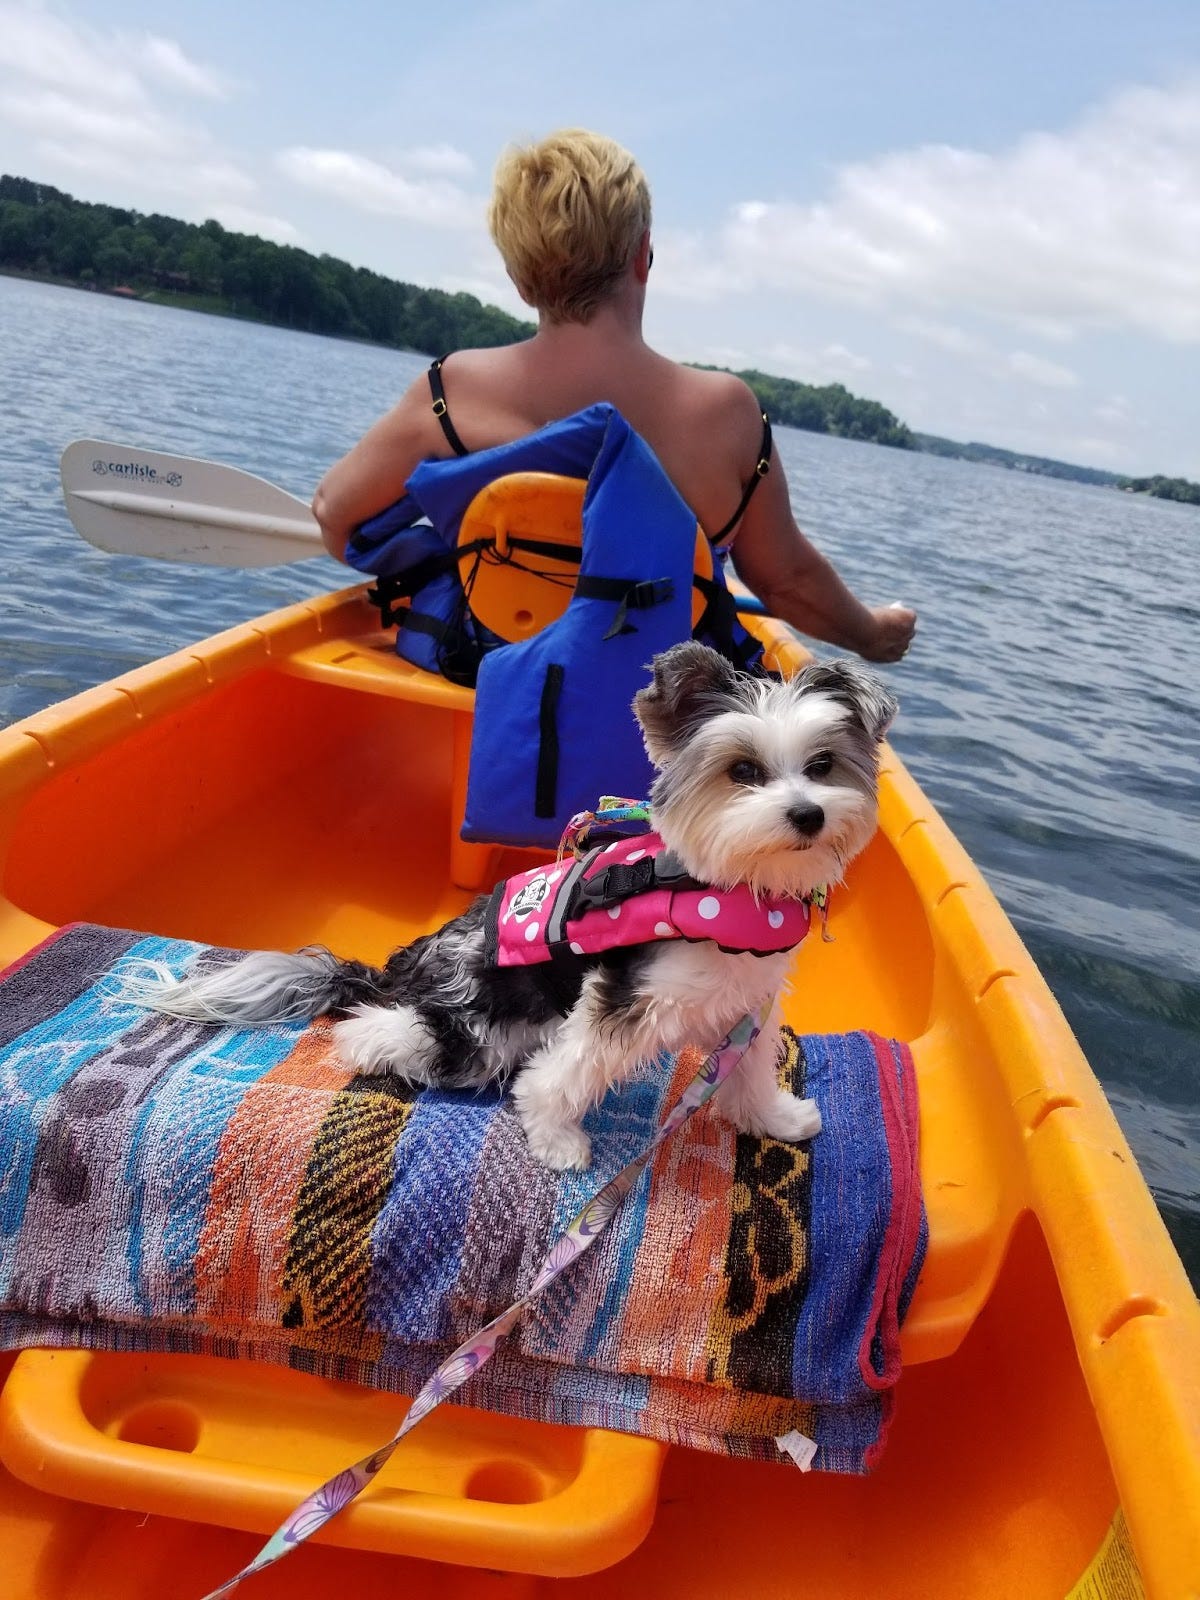 Dog and woman in canoe